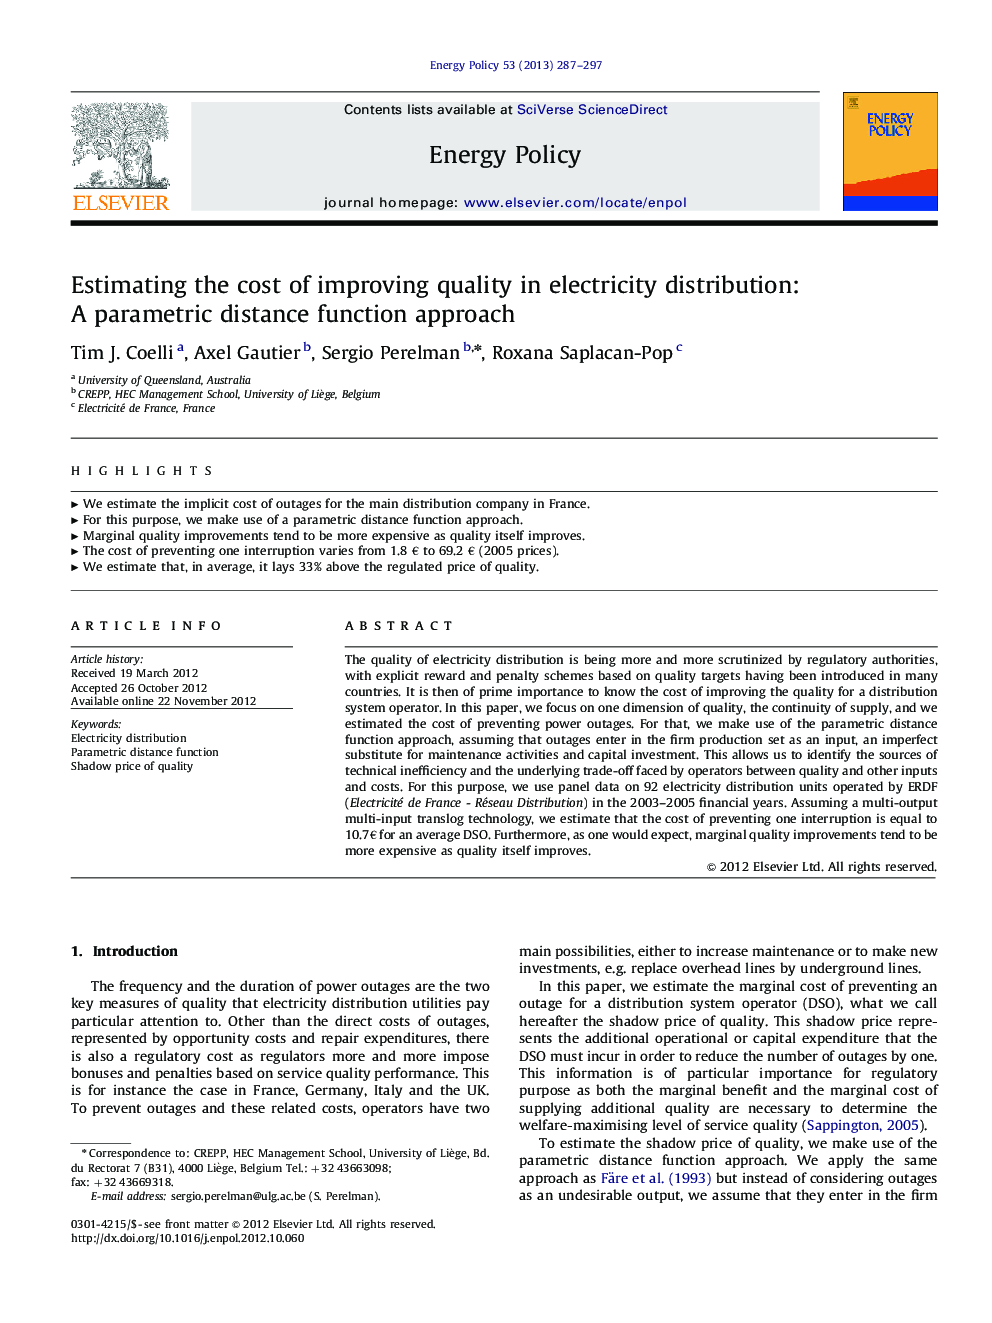 Estimating the cost of improving quality in electricity distribution: A parametric distance function approach